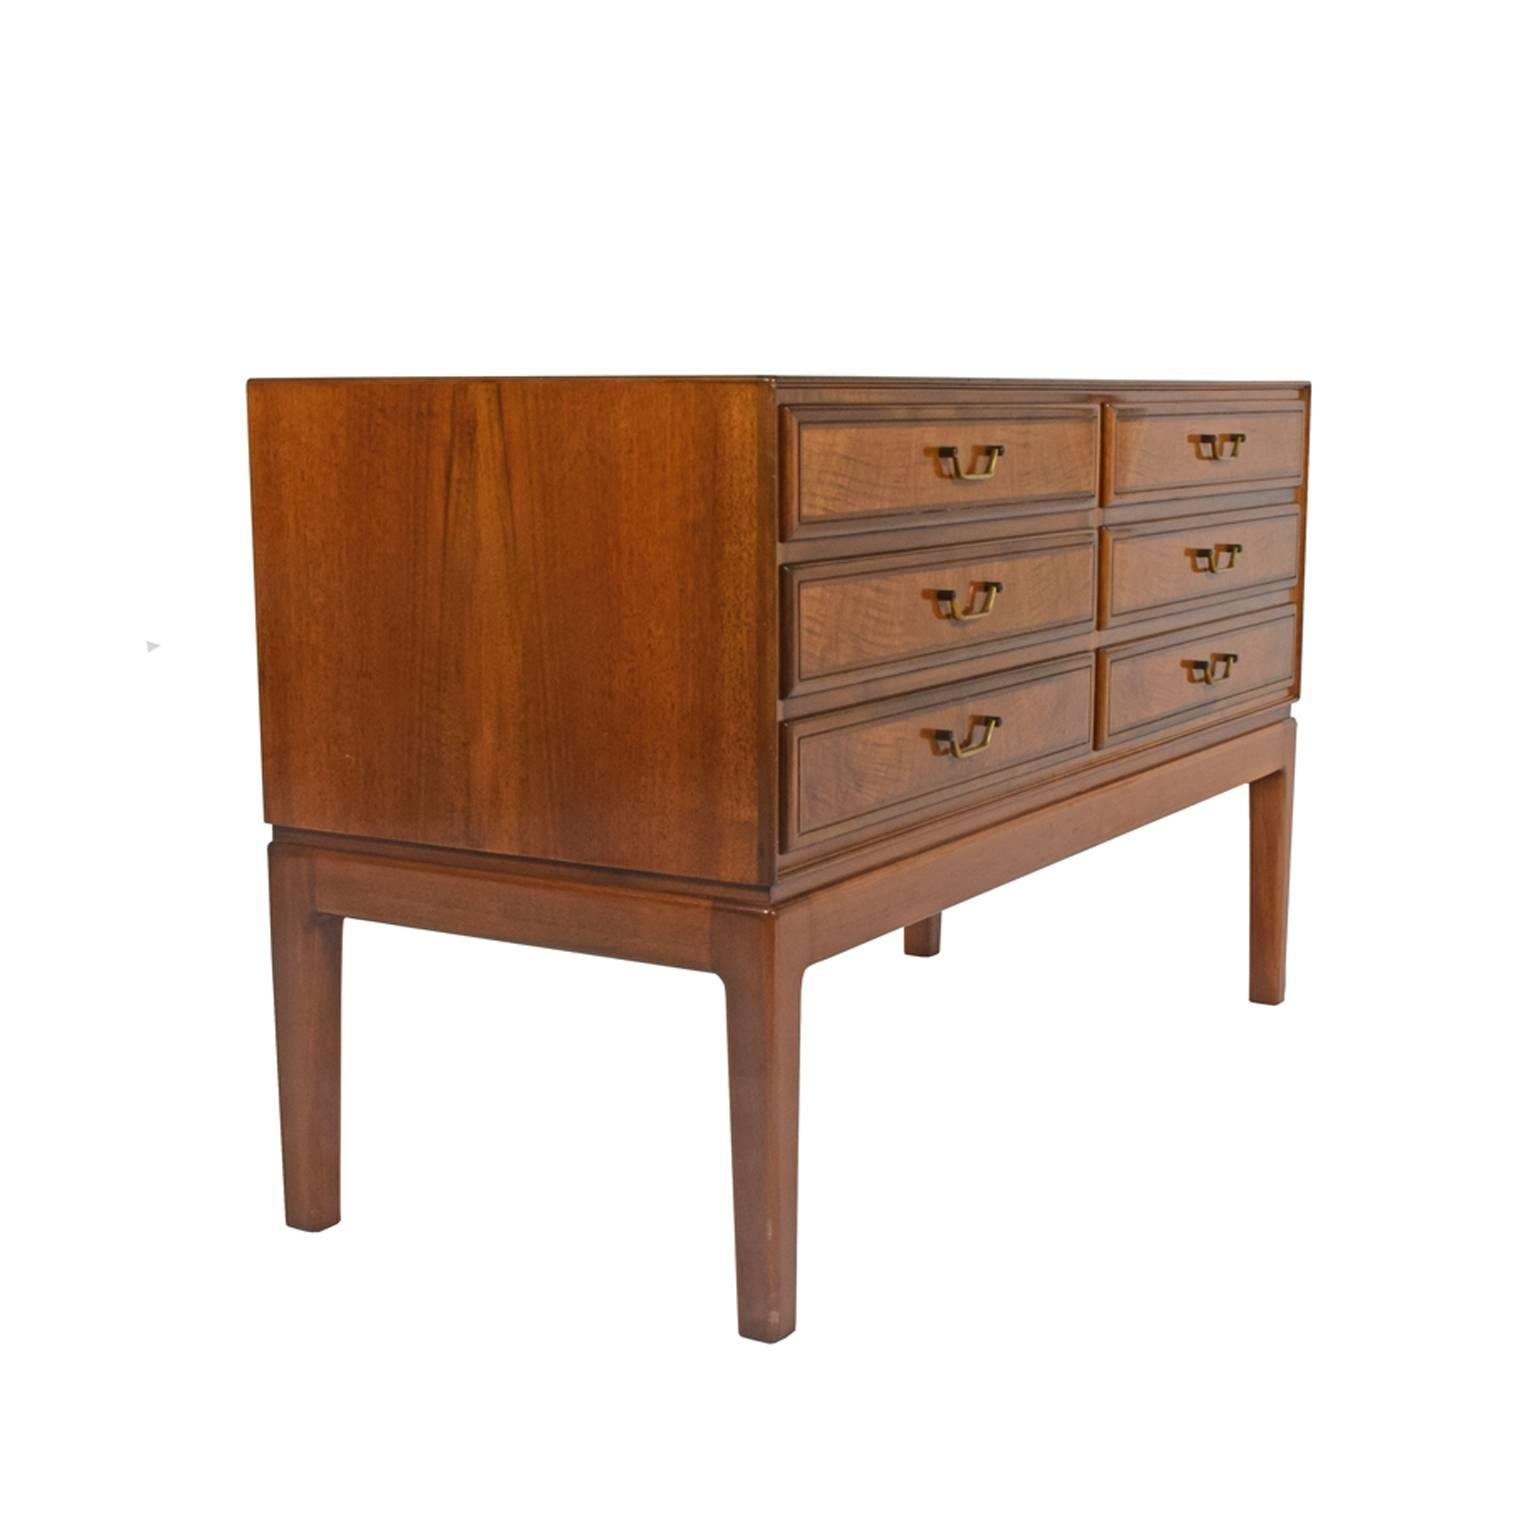 Danish 1940s Walnut Chest of Drawers Attributed to Ole Wanscher